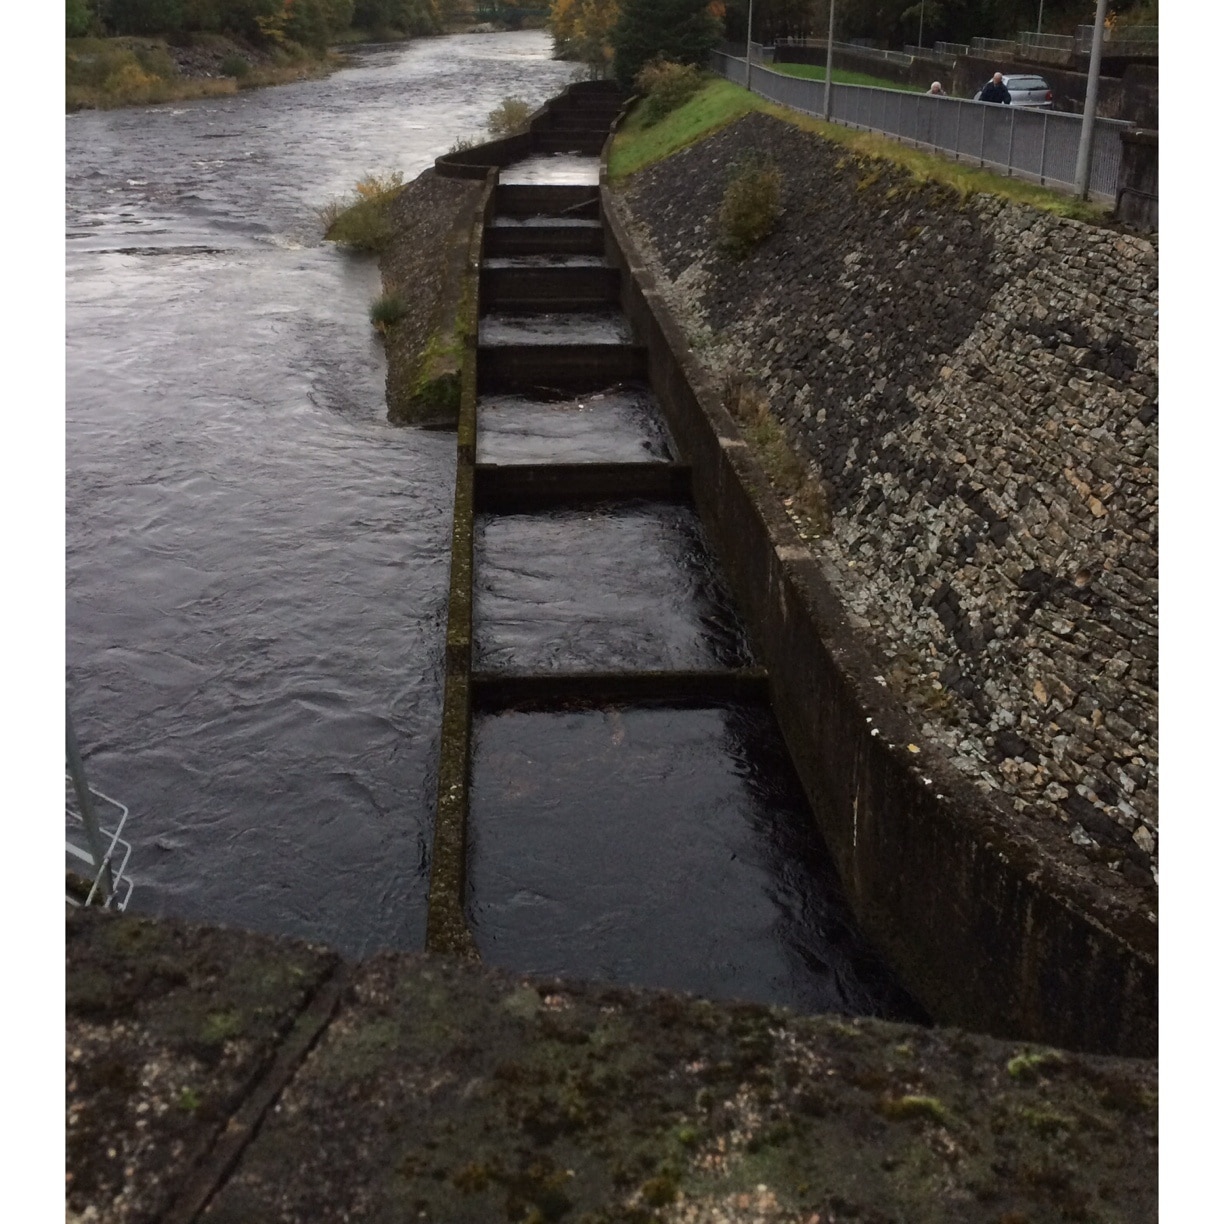 First part of Pitlochry fish ladder. This is built as a series of leaps to allow salmon swimming upstream to bypass the hydroelectric dam on the river. 